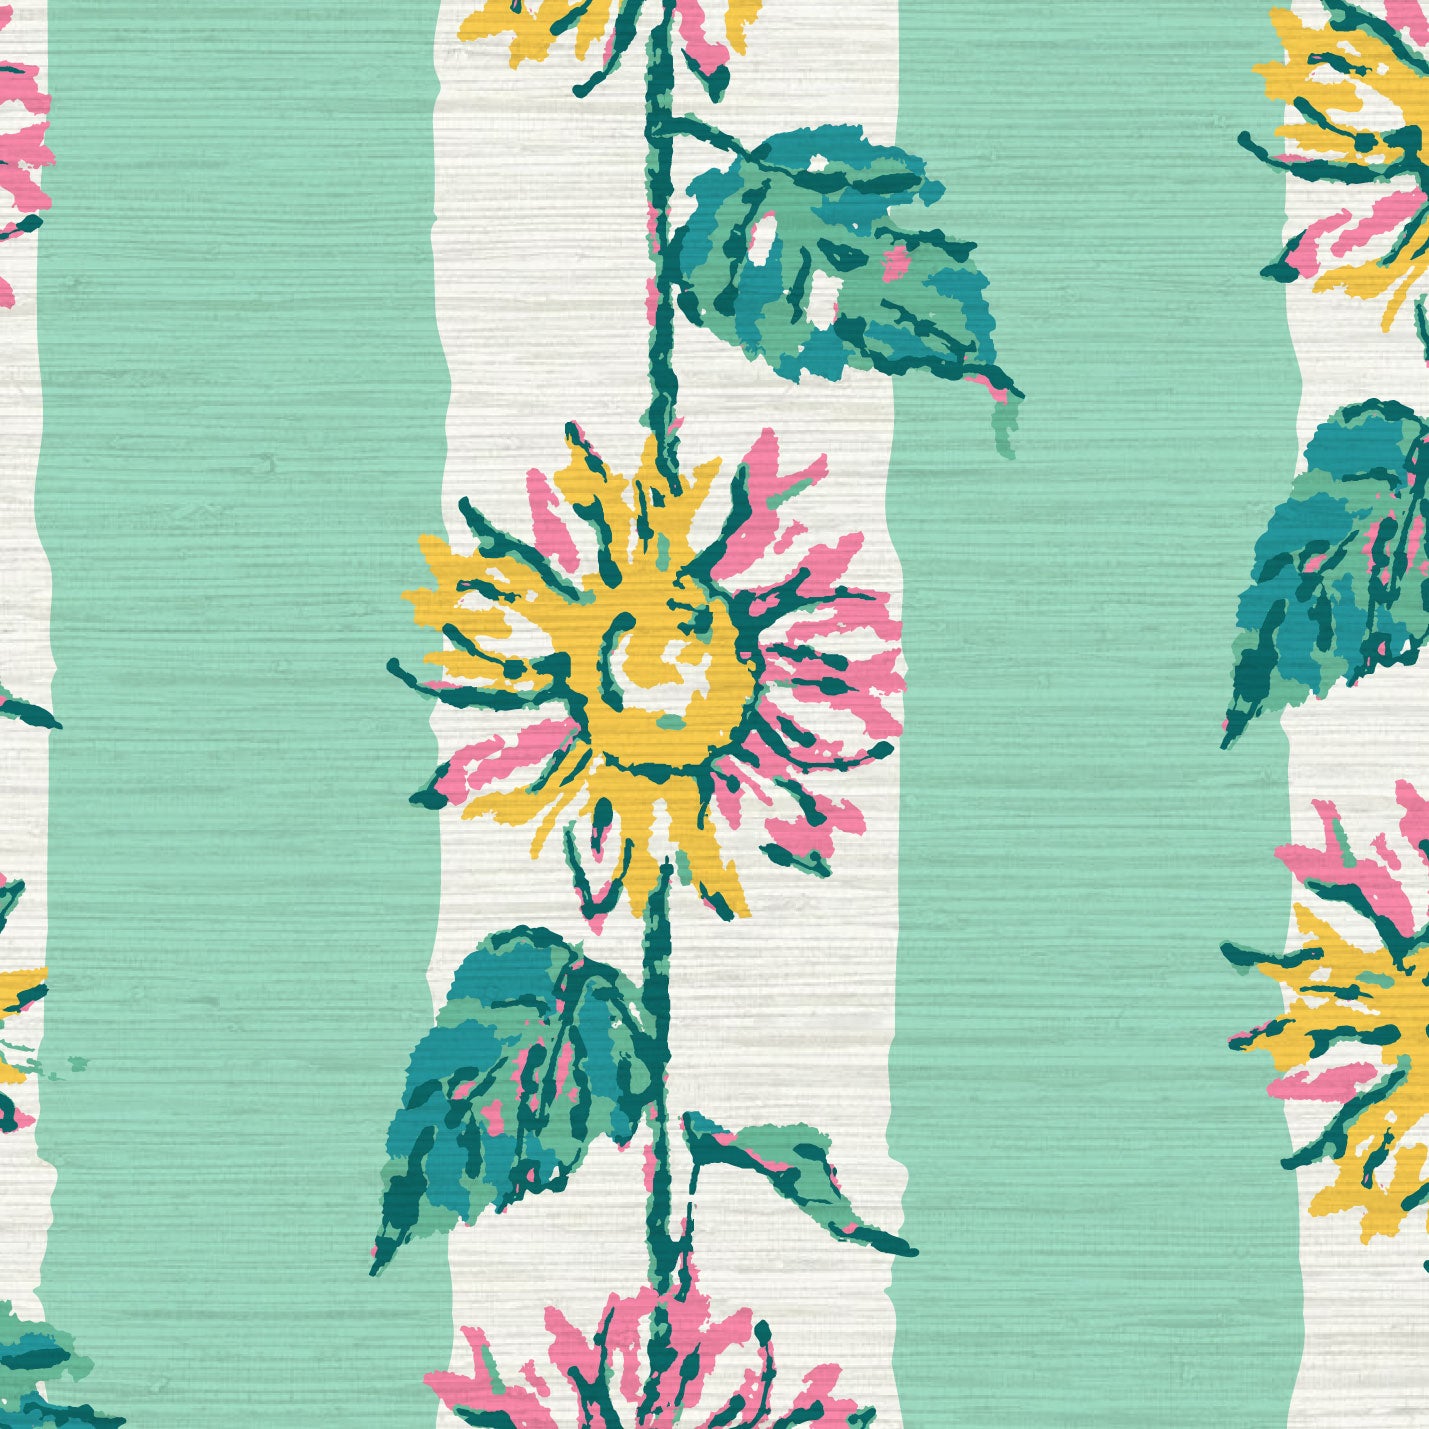 Grasscloth wallpaper Natural Textured Eco-Friendly Non-toxic High-quality  Sustainable Interior Design Bold Custom Tailor-made Retro chic garden cottage floral flower sunflower stripe botanical farm vacation house cabin bespoken sunflower yellow green leaf mint green white 